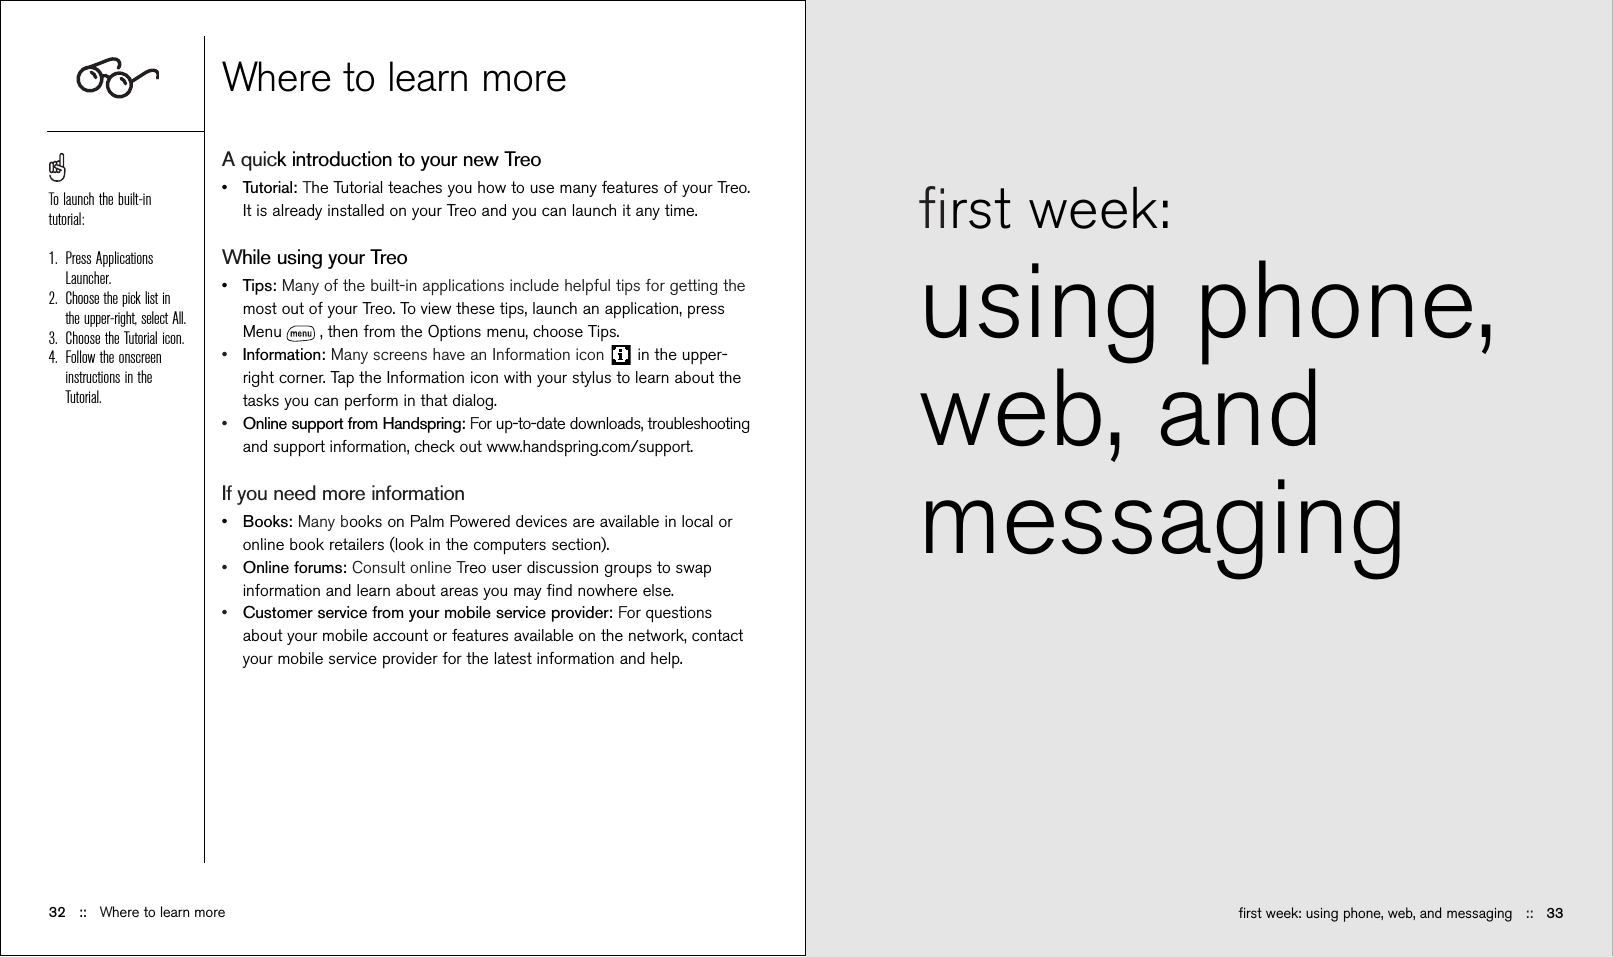 ﬁrst week: using phone,web, andmessaging ﬁrst week: using phone, web, and messaging ::   3332 ::   Where to learn moreWhere to learn moreA quick introduction to your new Treo•Tutorial: The Tutorial teaches you how to use many features of your Treo.It is already installed on your Treo and you can launch it any time.While using your Treo•Tips: Many of the built-in applications include helpful tips for getting themost out of your Treo. To view these tips, launch an application, pressMenu , then from the Options menu, choose Tips.•Information: Many screens have an Information icon  in the upper-right corner. Tap the Information icon with your stylus to learn about thetasks you can perform in that dialog.•Online support from Handspring: For up-to-date downloads, troubleshootingand support information, check out www.handspring.com/support.If you need more information•Books: Many books on Palm Powered devices are available in local oronline book retailers (look in the computers section).•Online forums: Consult online Treo user discussion groups to swapinformation and learn about areas you may ﬁnd nowhere else.•Customer service from your mobile service provider: For questionsabout your mobile account or features available on the network, contactyour mobile service provider for the latest information and help.To launch the built-intutorial:1. Press ApplicationsLauncher. 2. Choose the pick list inthe upper-right, select All.3. Choose the Tutorial icon.4. Follow the onscreeninstructions in theTutorial.